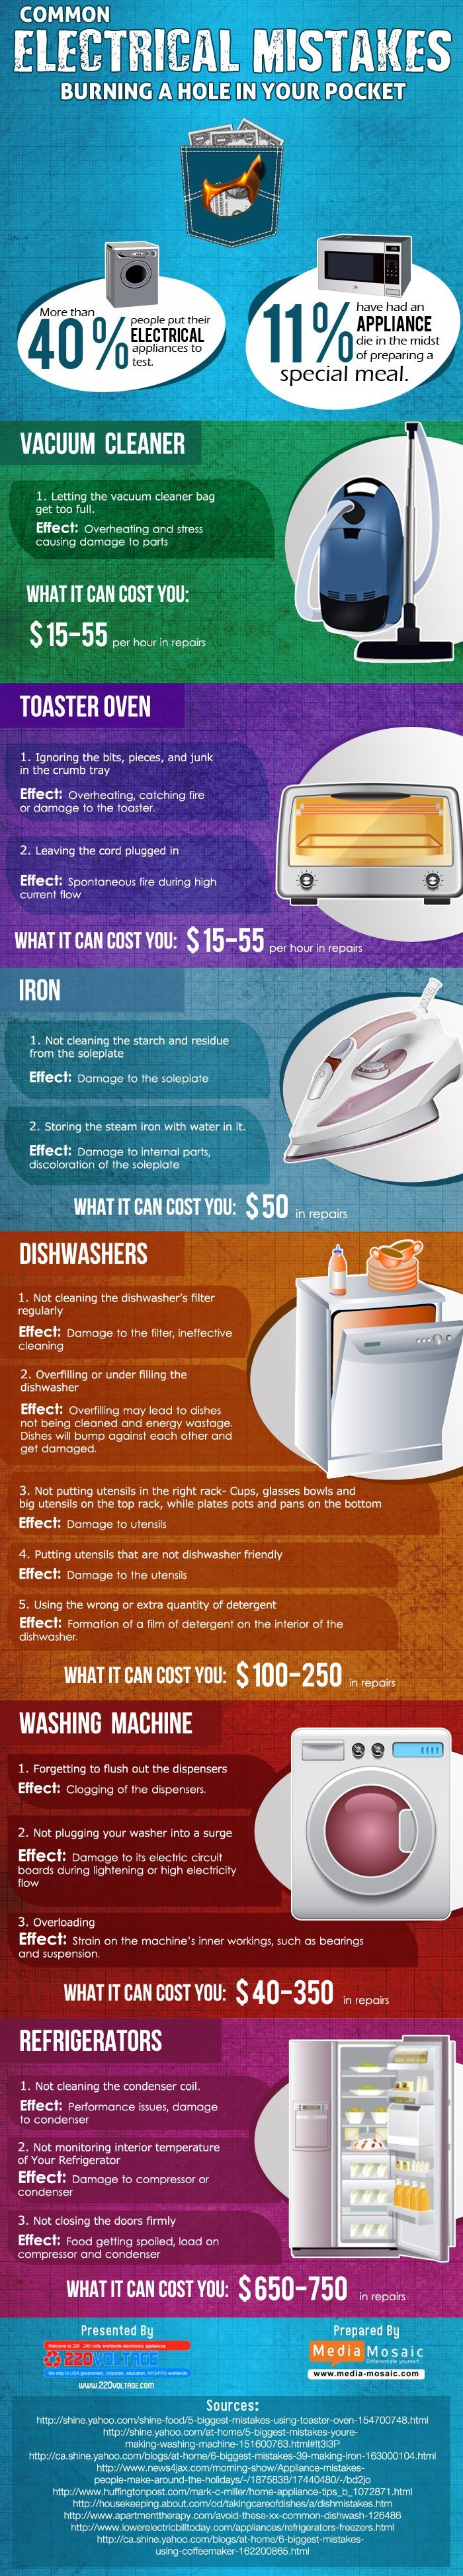 Common Electrical Mistakes That Burn A Hole In Your Pocket Infographic